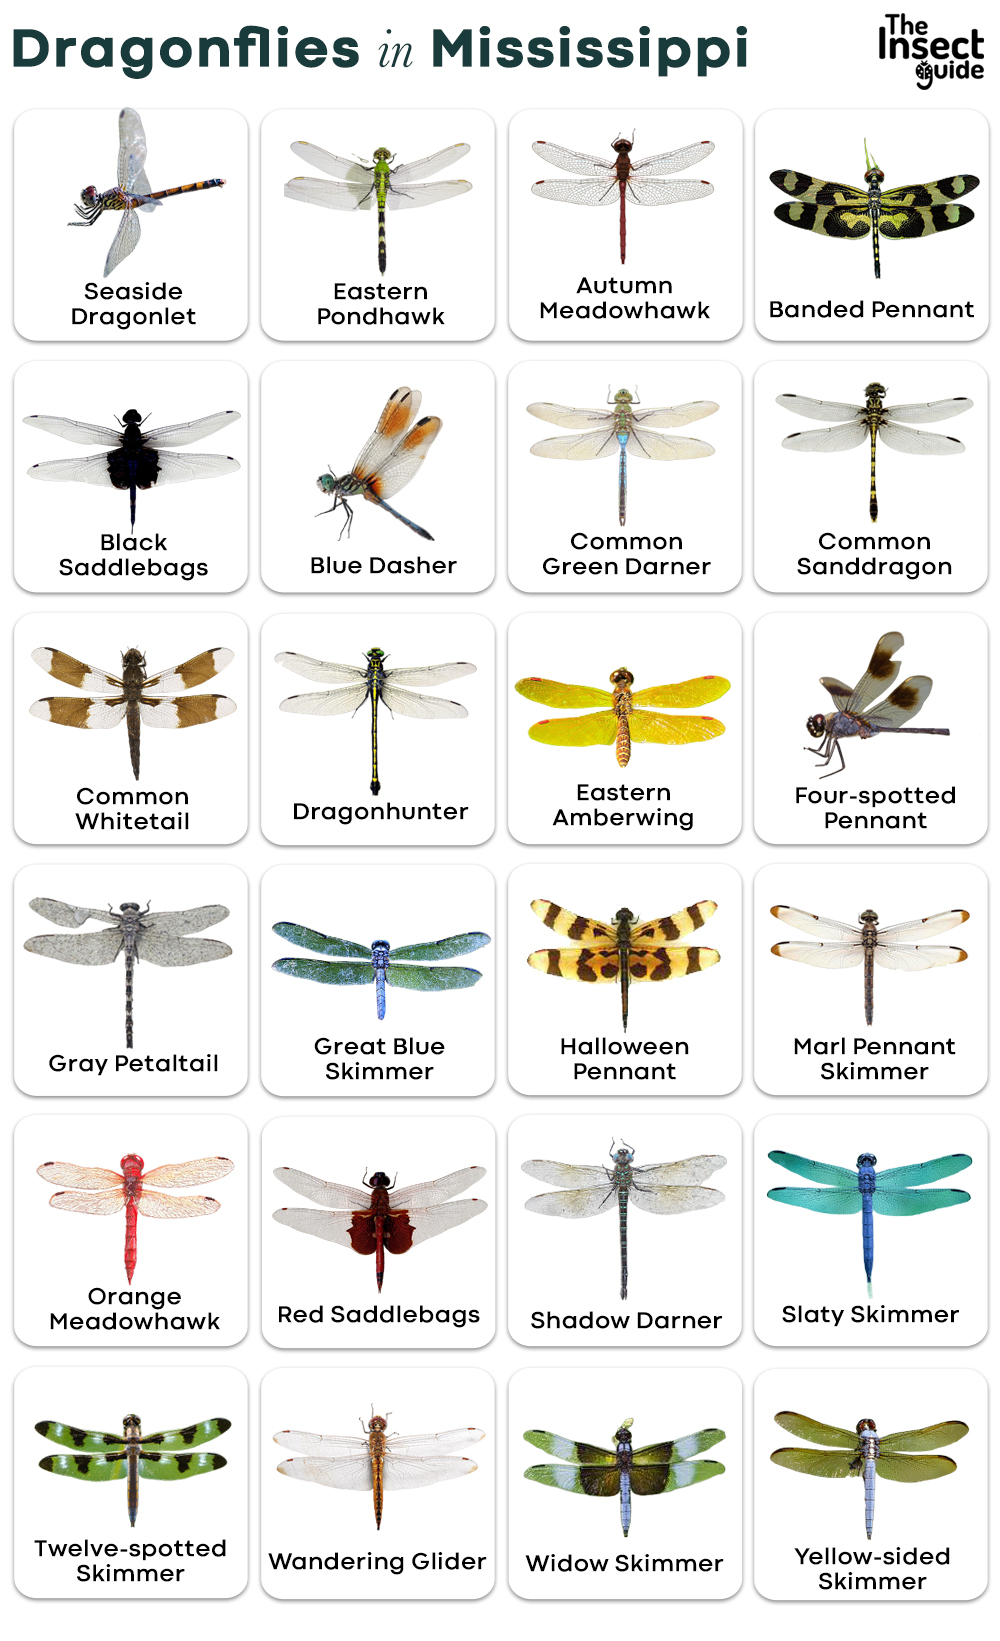 List of Common Types of Dragonflies in Mississippi – with Pictures